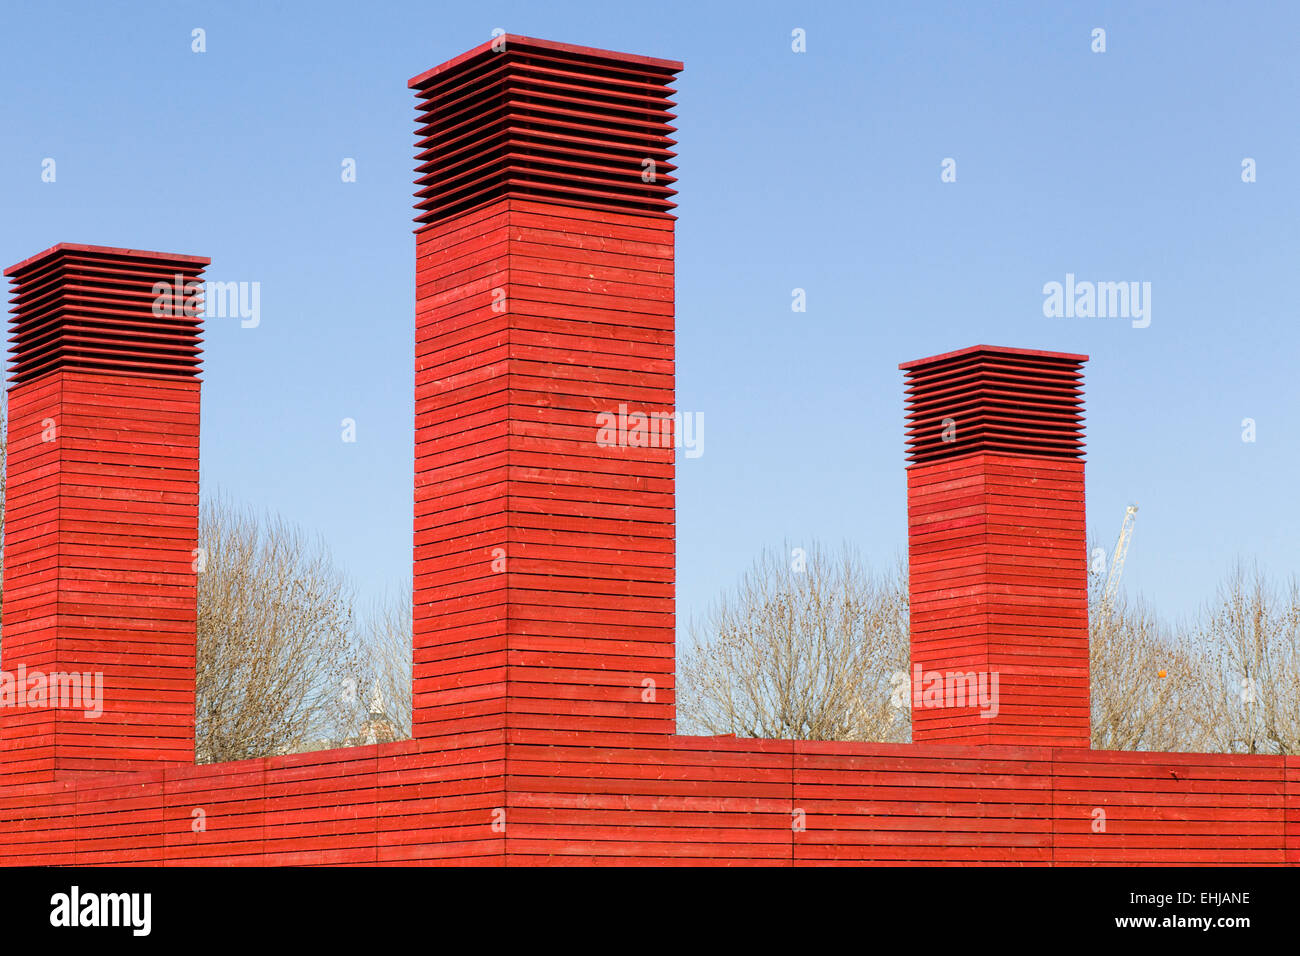 The Shed at the National Theatre red against a blue sky London England Stock Photo